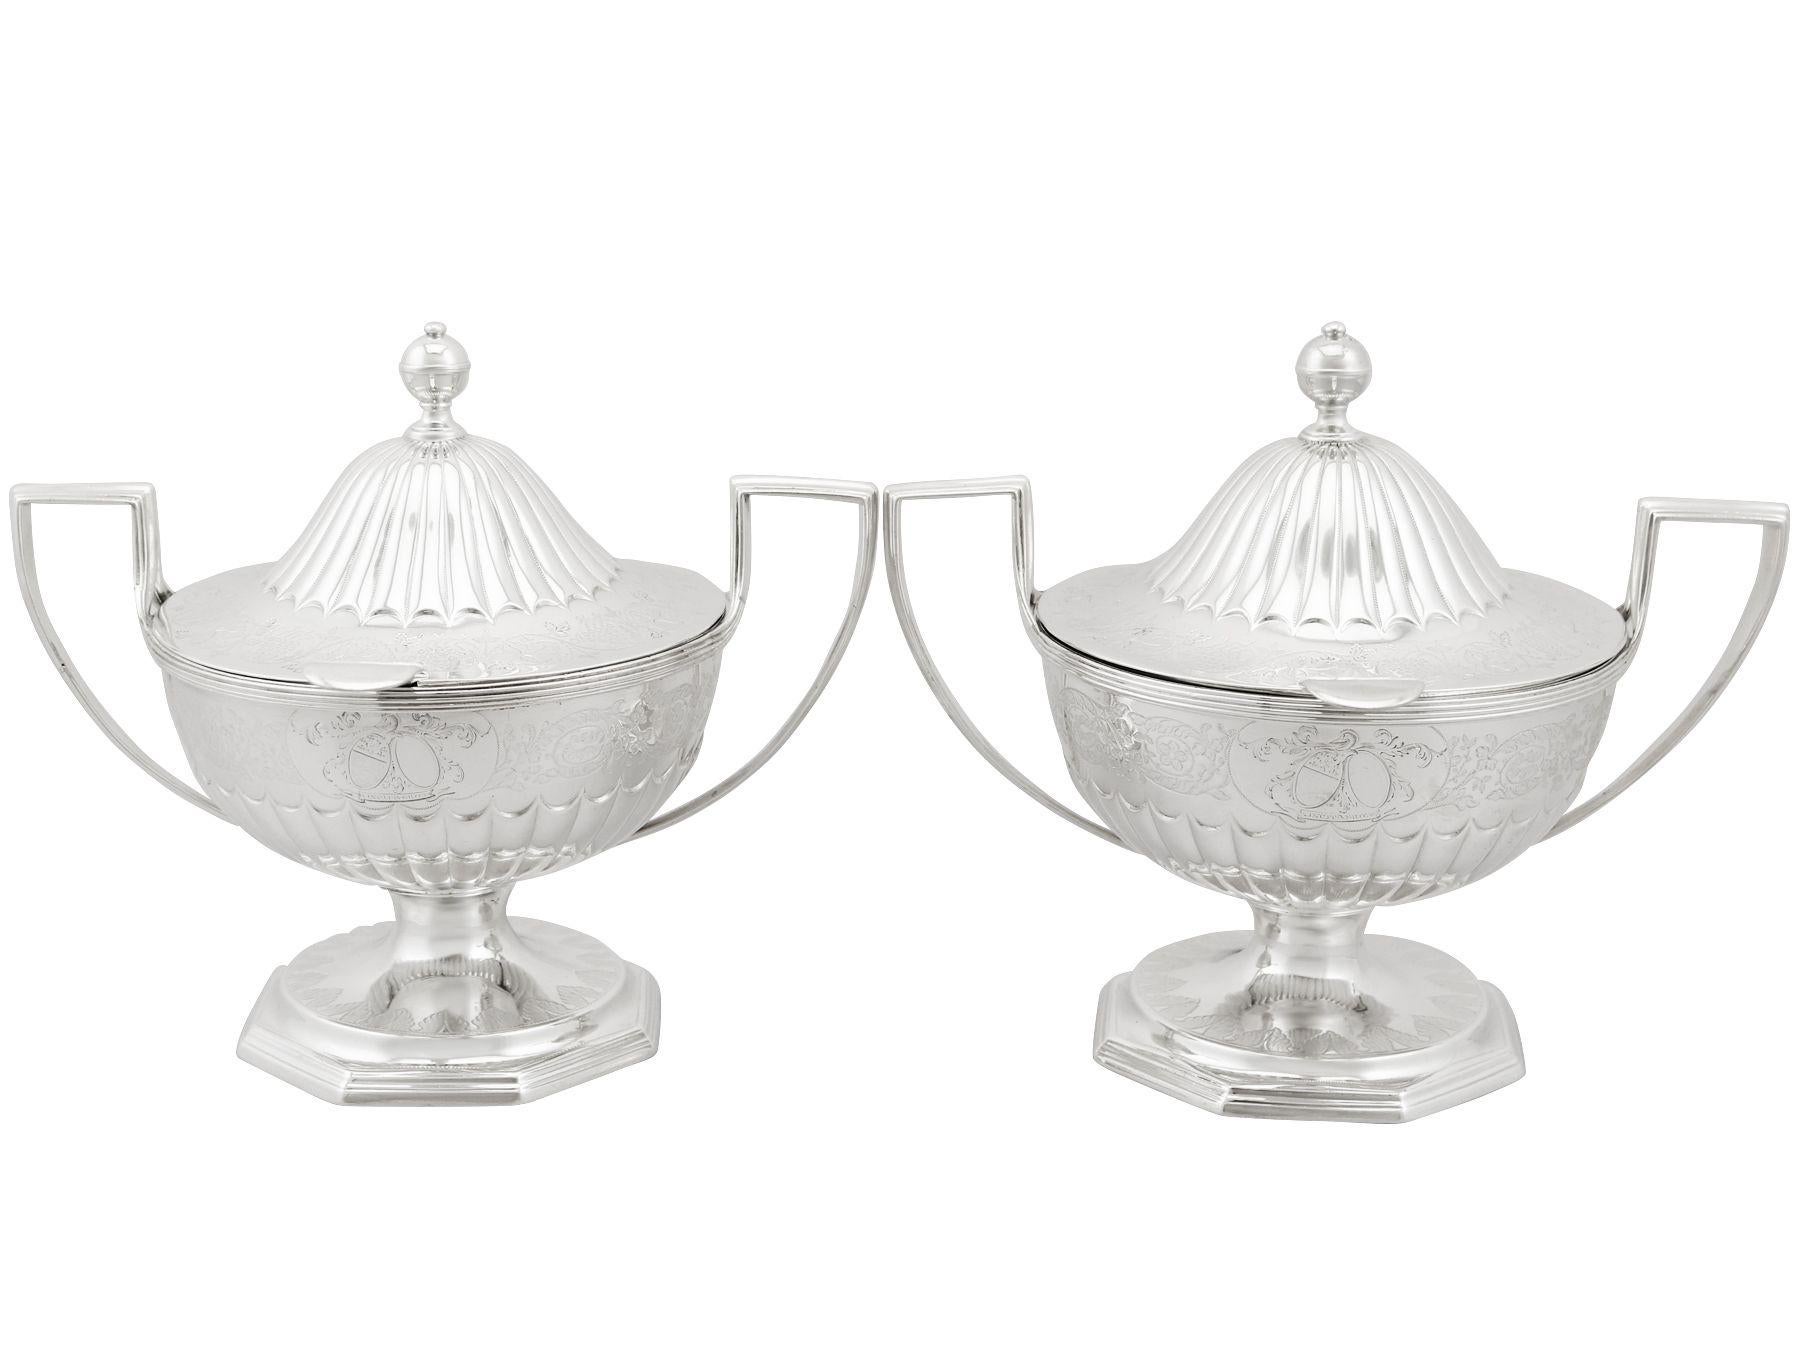 An exceptional, fine and impressive pair of antique Georgian English sterling silver sauce tureens; an addition to our Georgian silverware collection.

These exceptional antique George III sterling silver sauce tureens have a circular rounded form